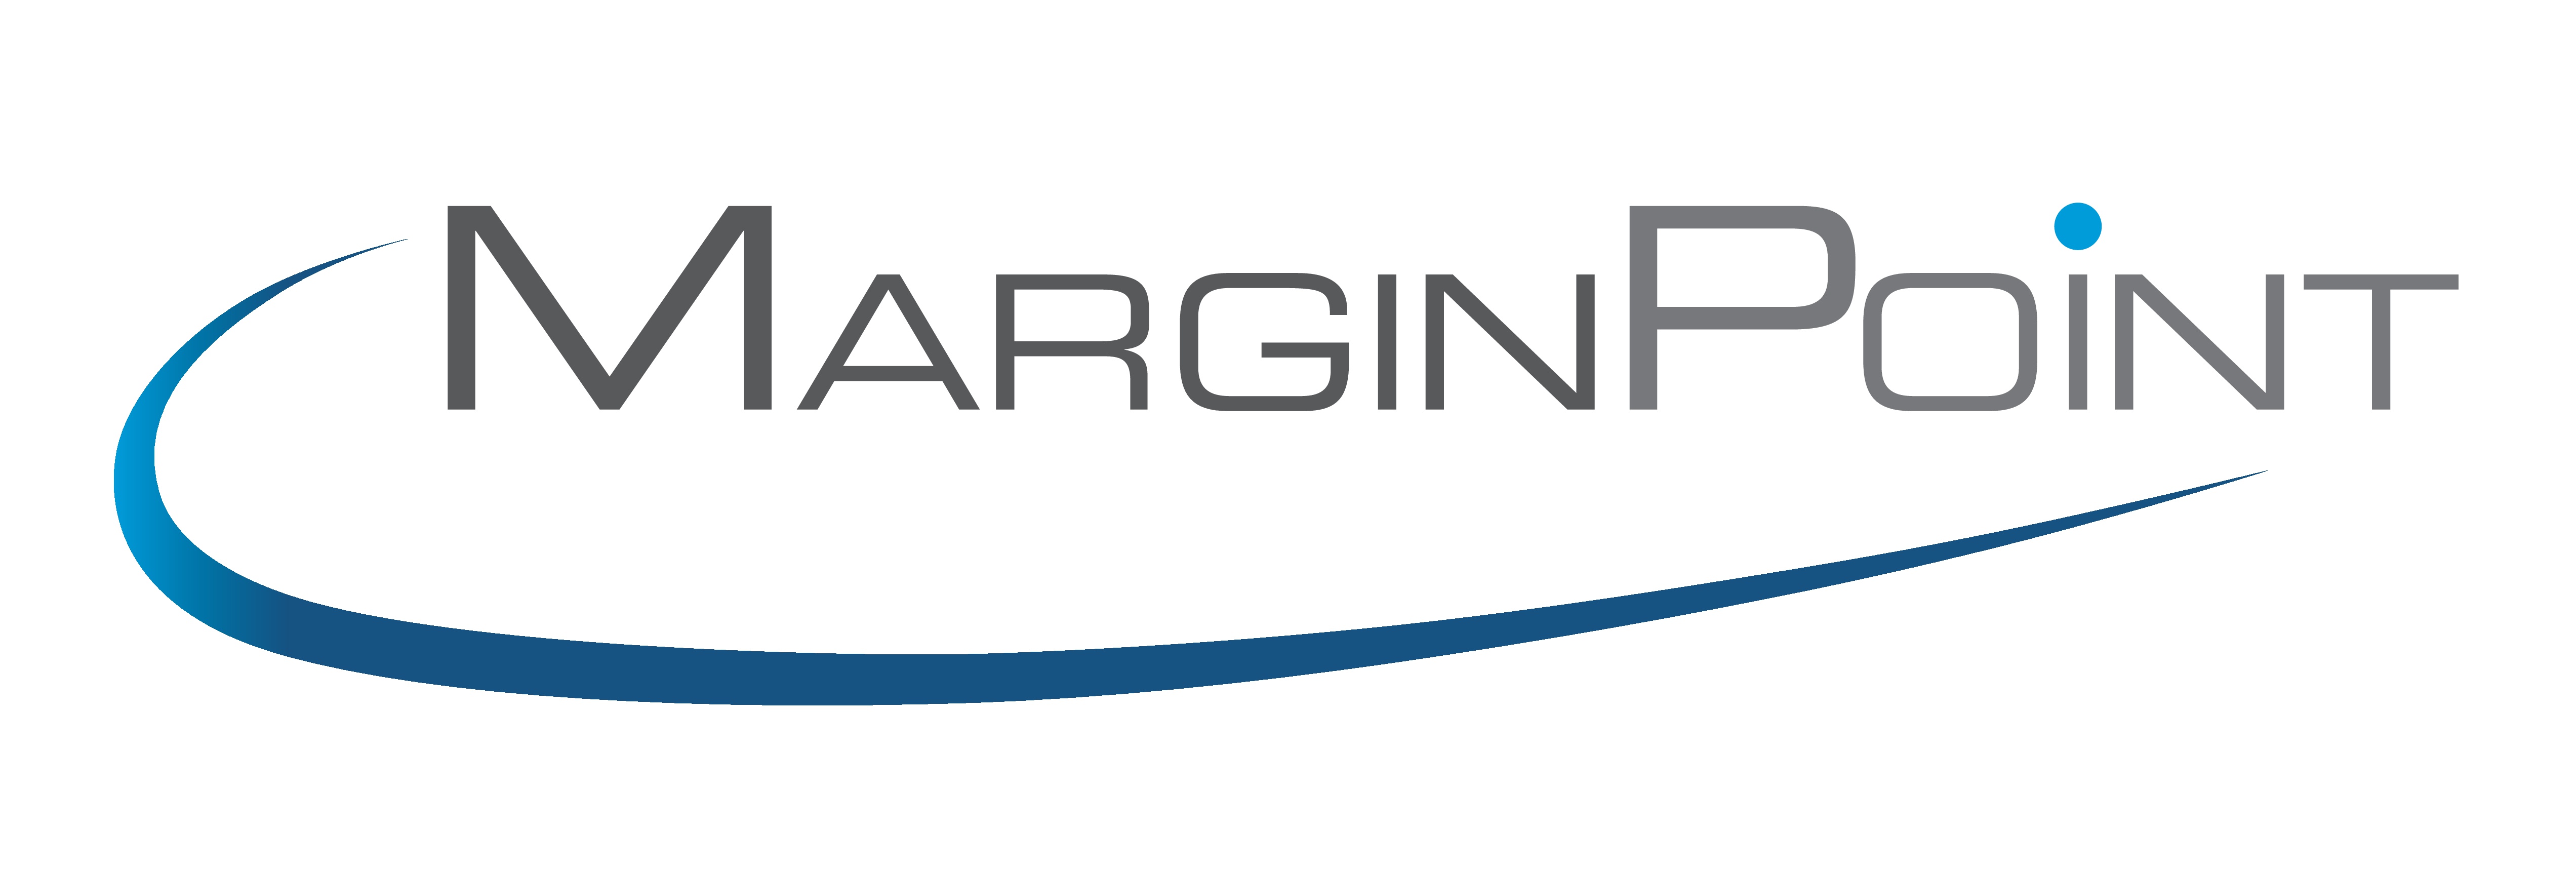 MarginPoint is a leading provider of mobile-enabled, collaborative inventory management solutions for distributors, suppliers, and their customers.